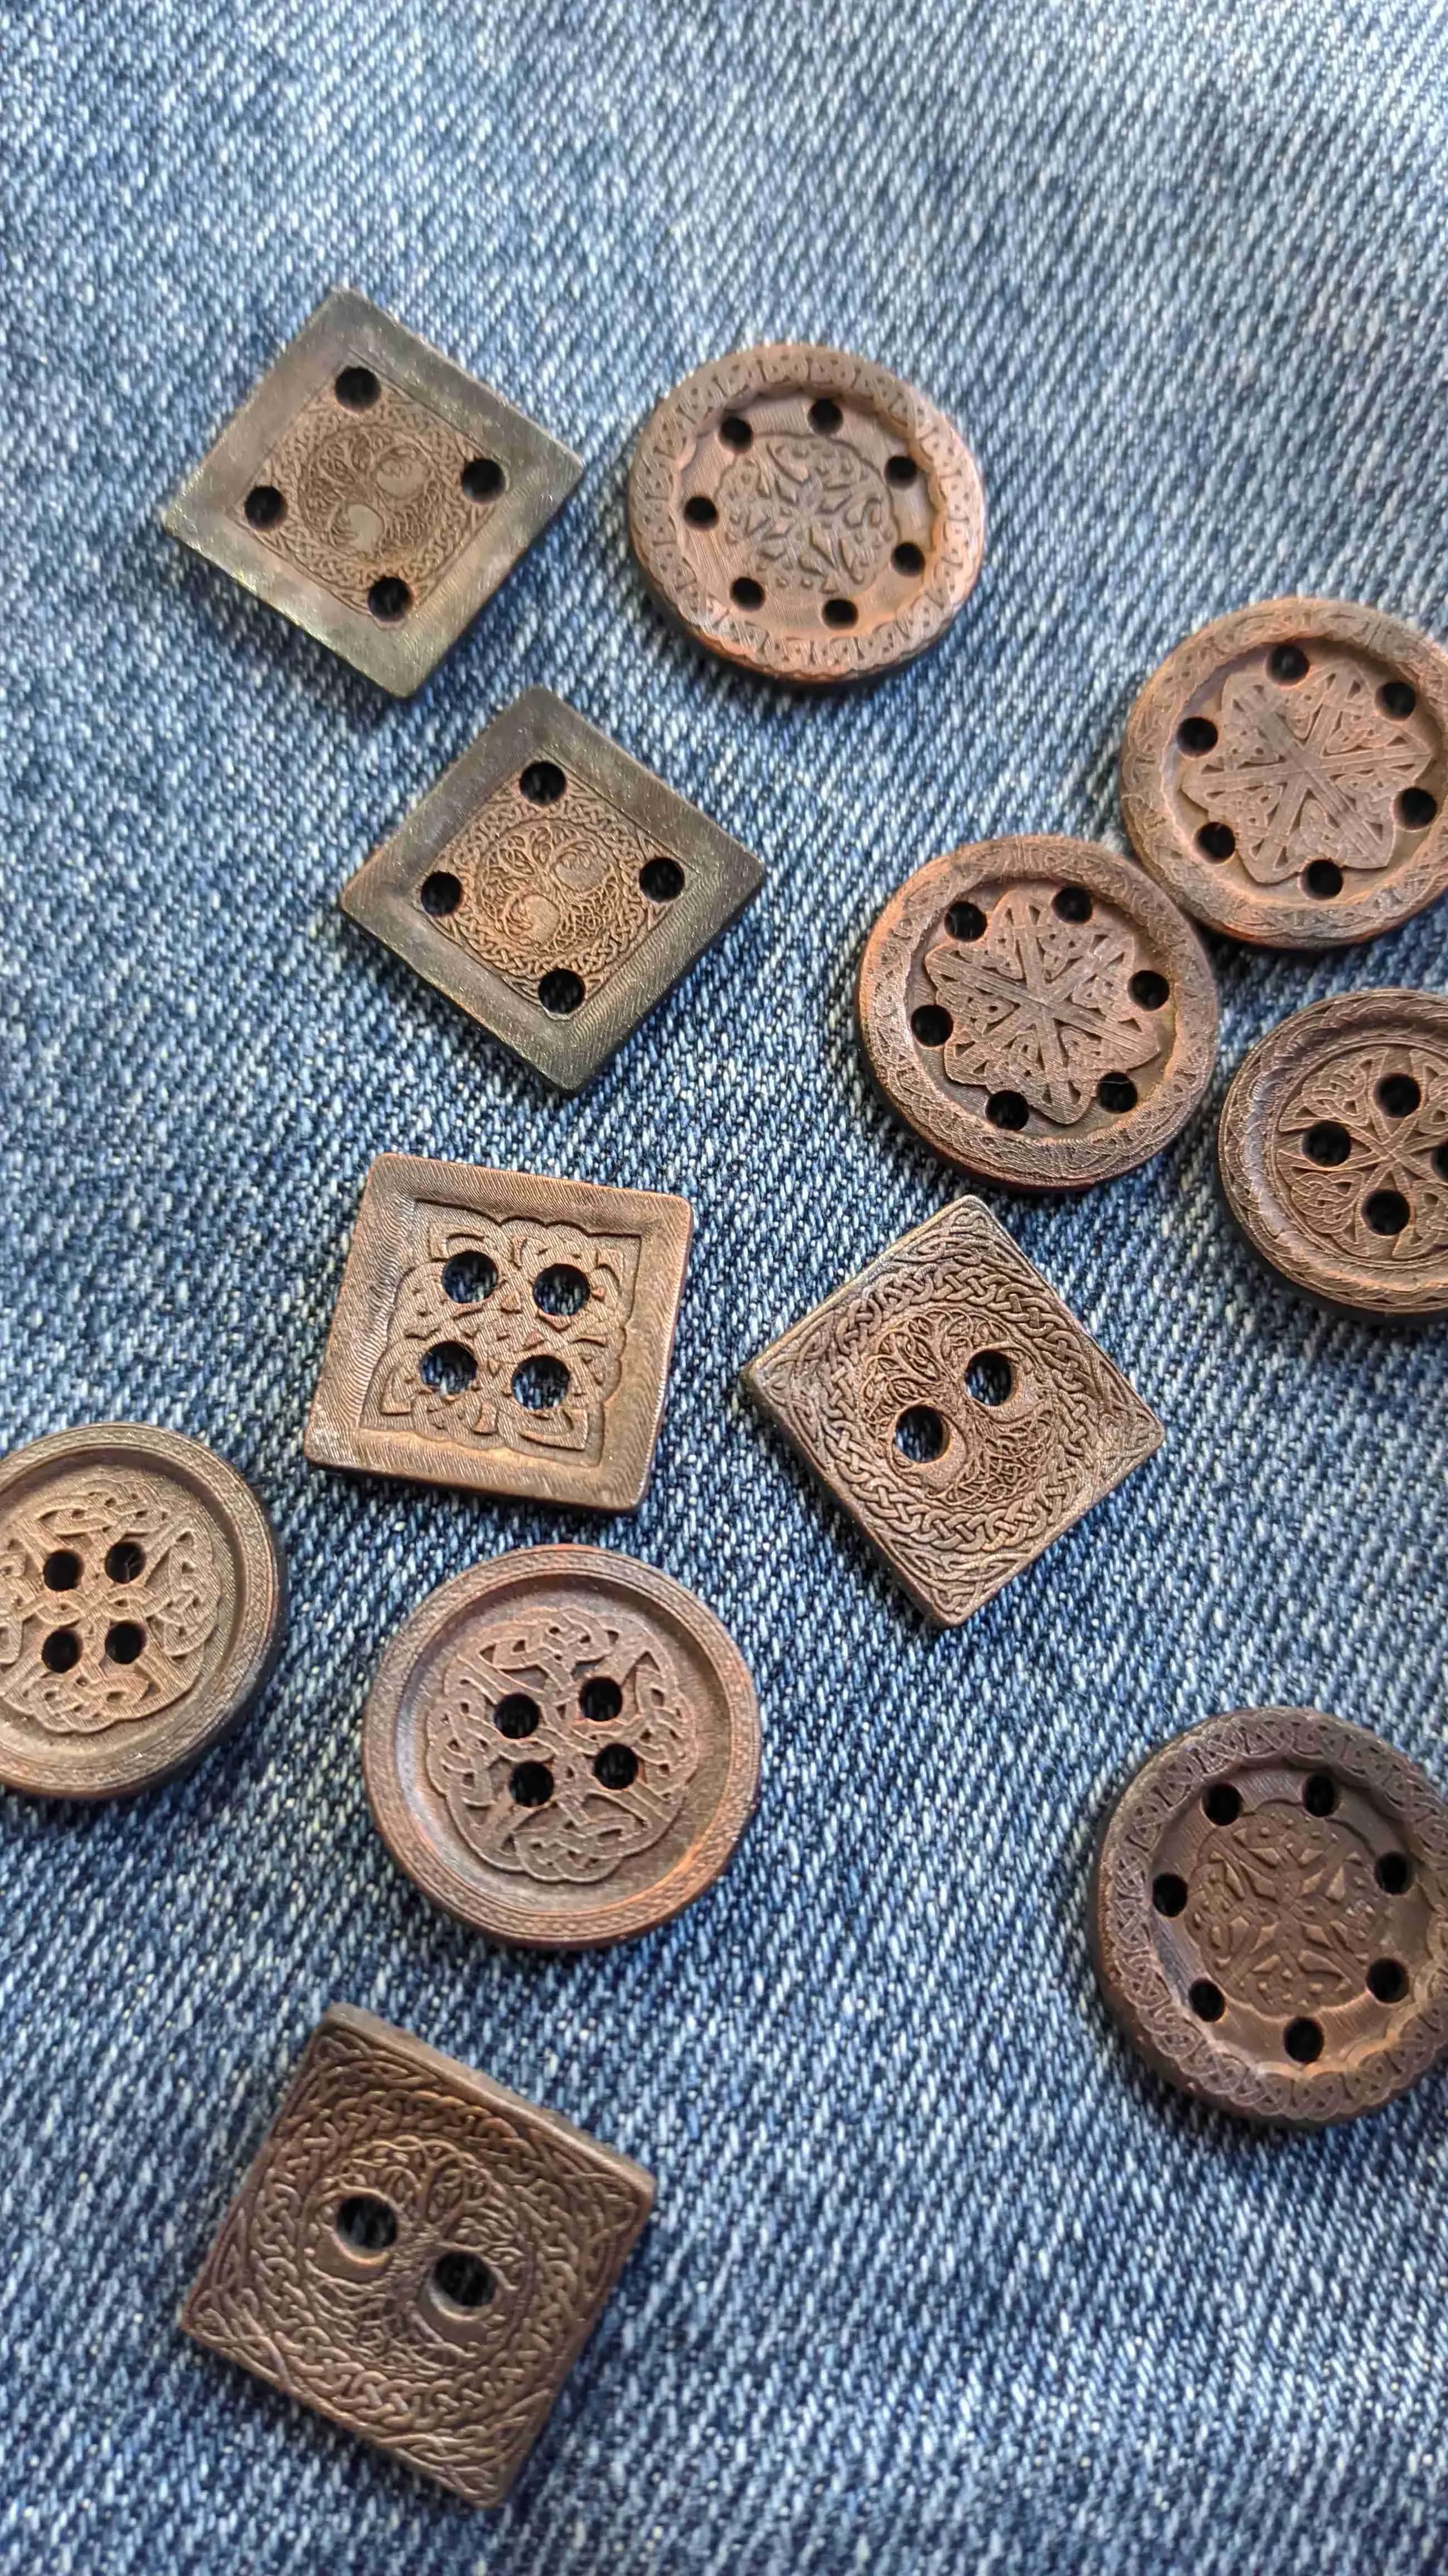 Buttons in Scandinavian style